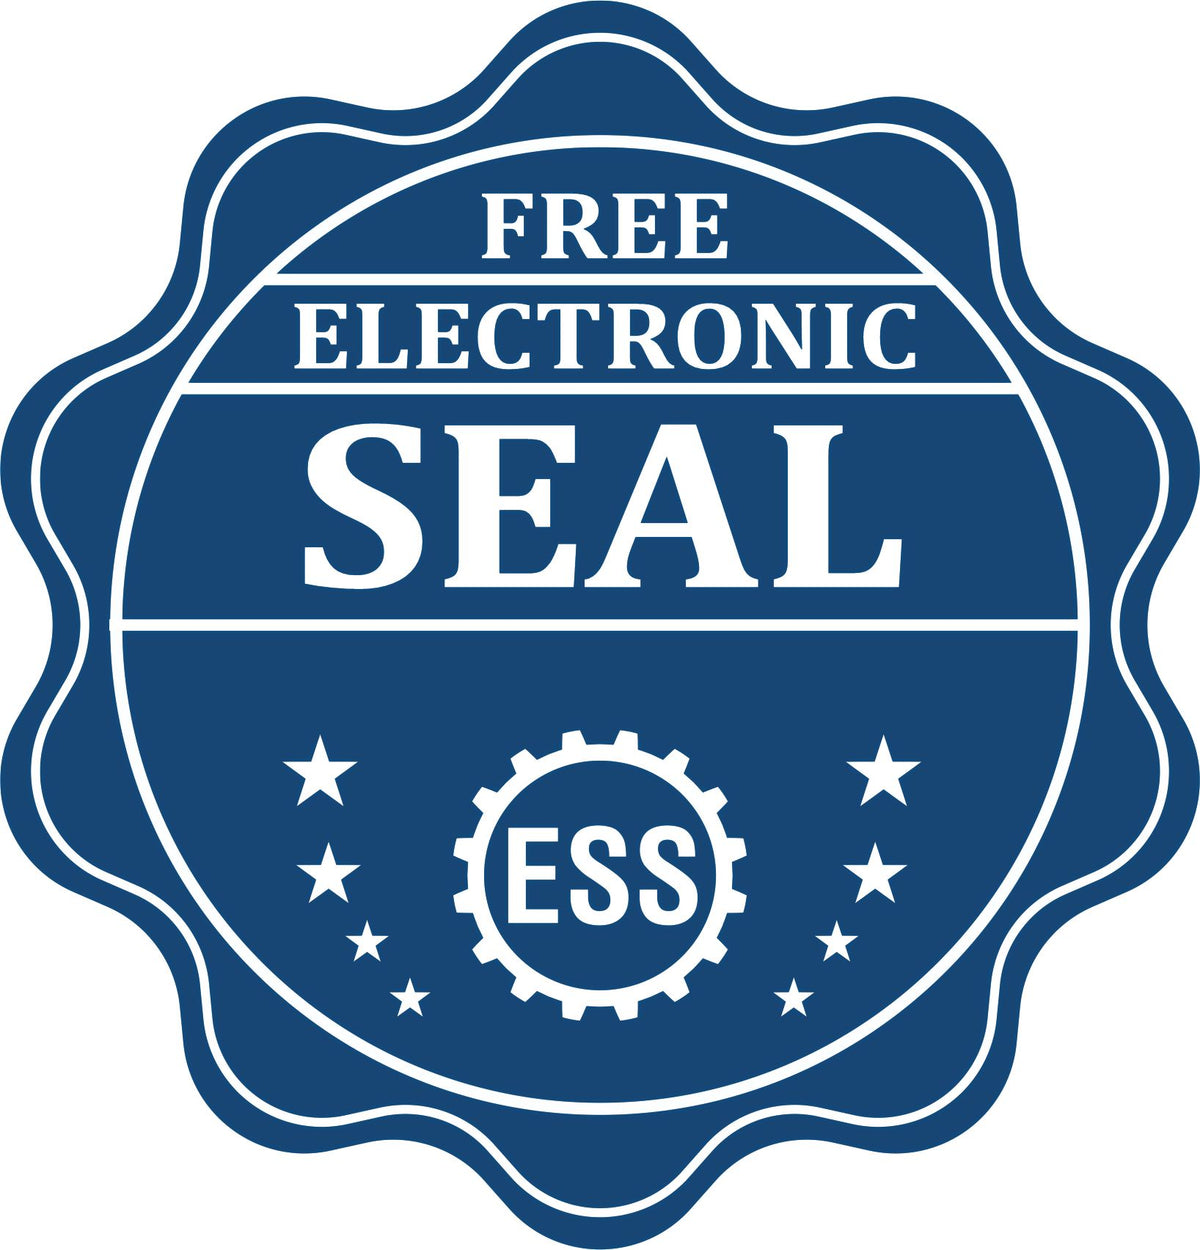 A badge showing a free electronic seal for the Hybrid Louisiana Engineer Seal with stars and the ESS gear on the emblem.